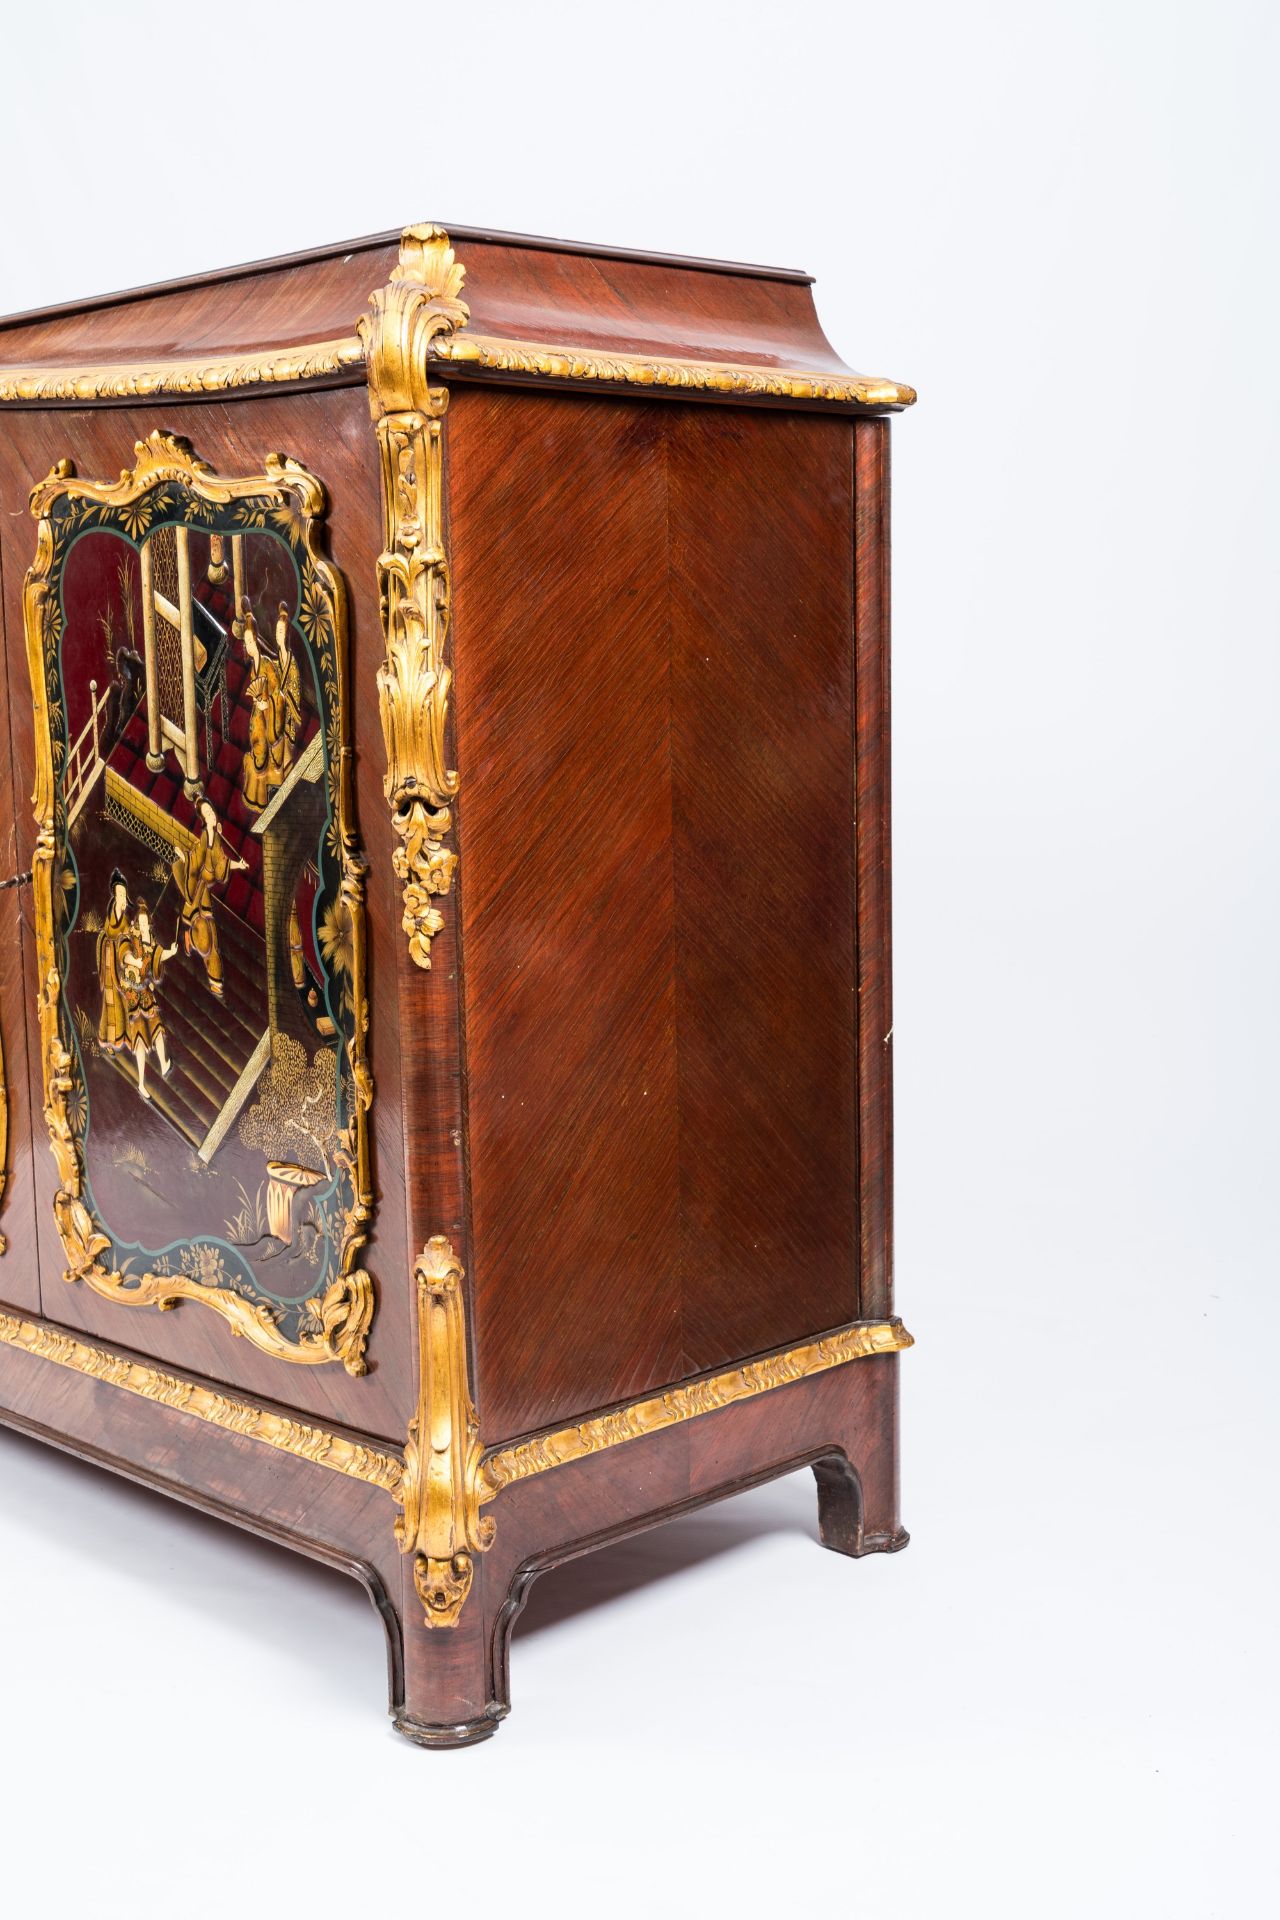 A French gilt wood and mahogany veneered four-door sideboard with oriental style lacquer, 20th C. - Image 5 of 10